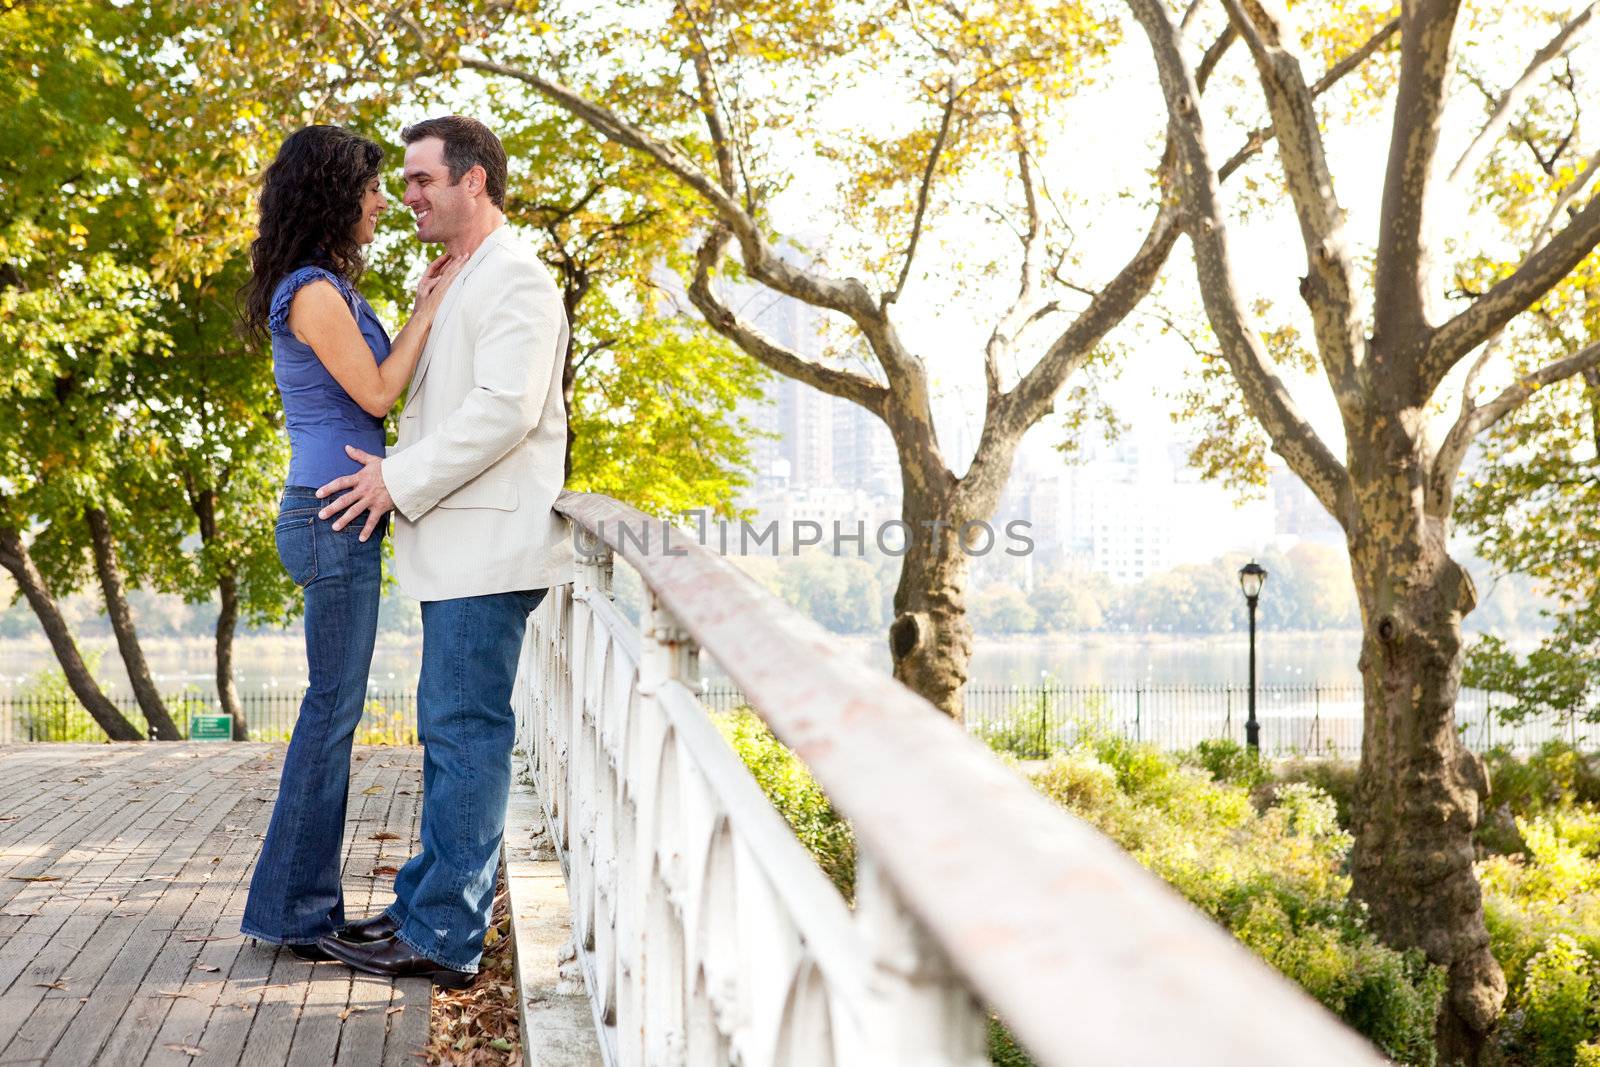 A couple smiling and looking at eachother in a park